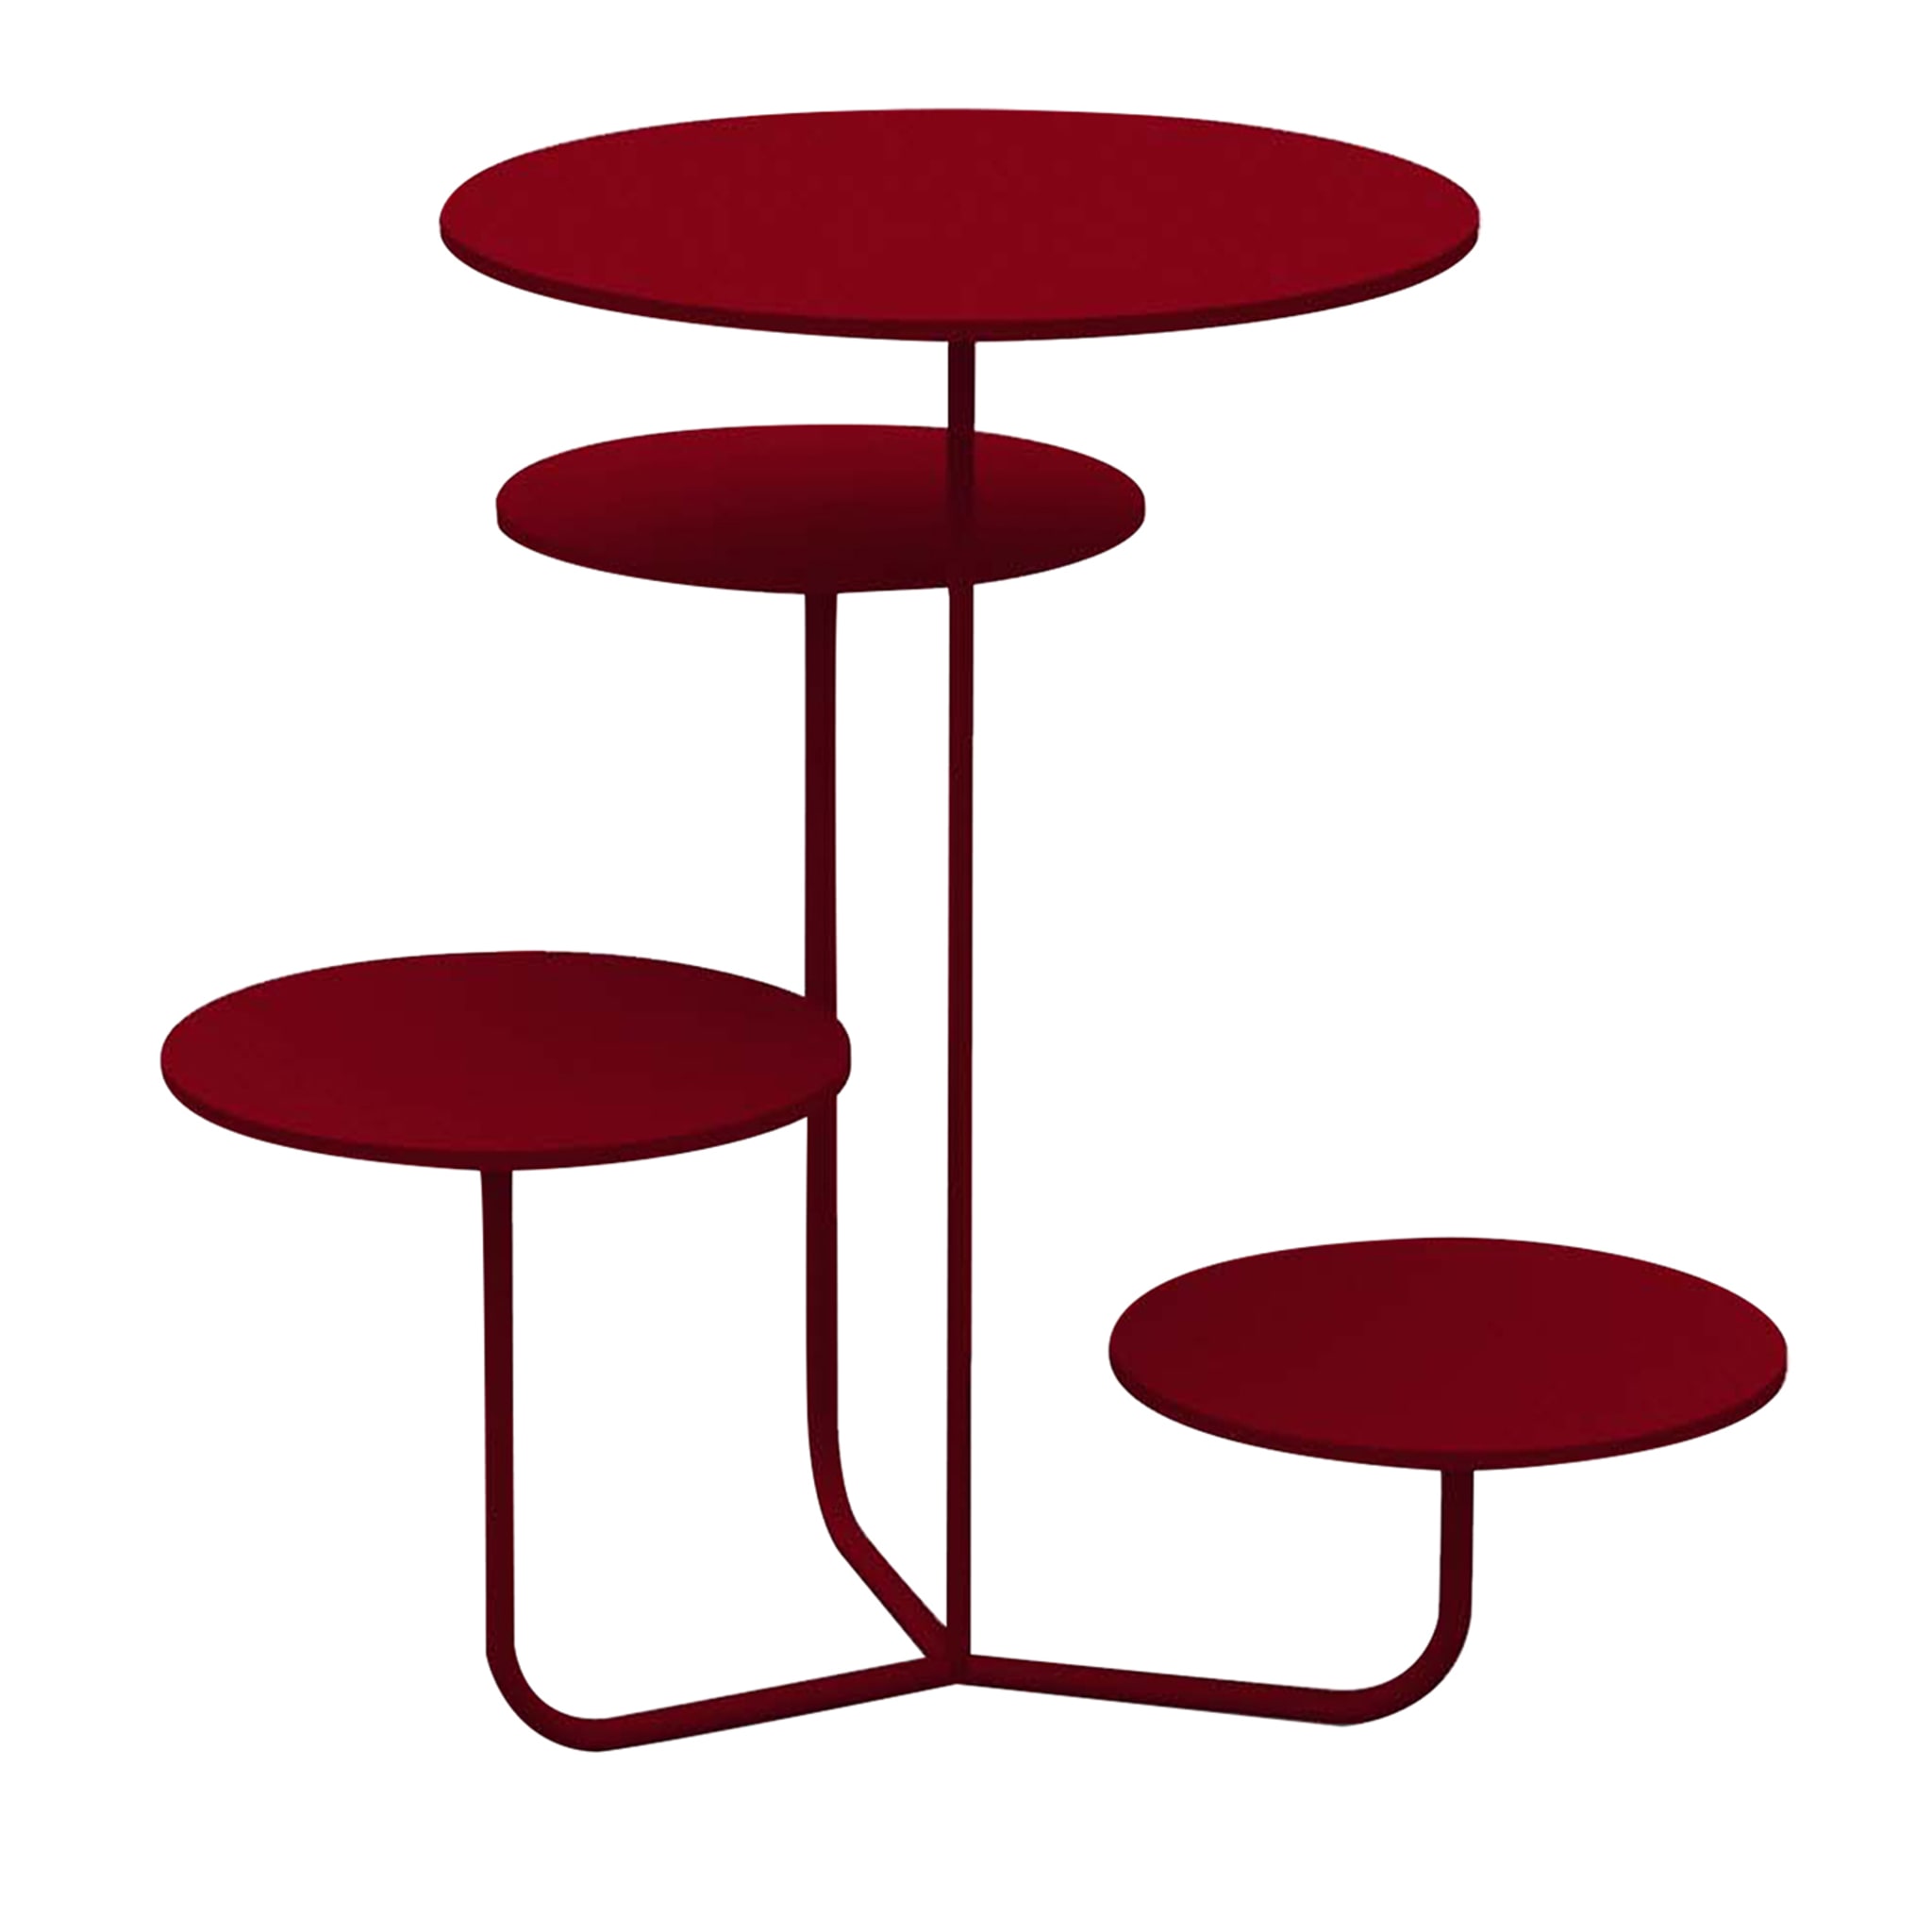 Condiviso 4-Tier Ruby Red Serving Stand - Main view